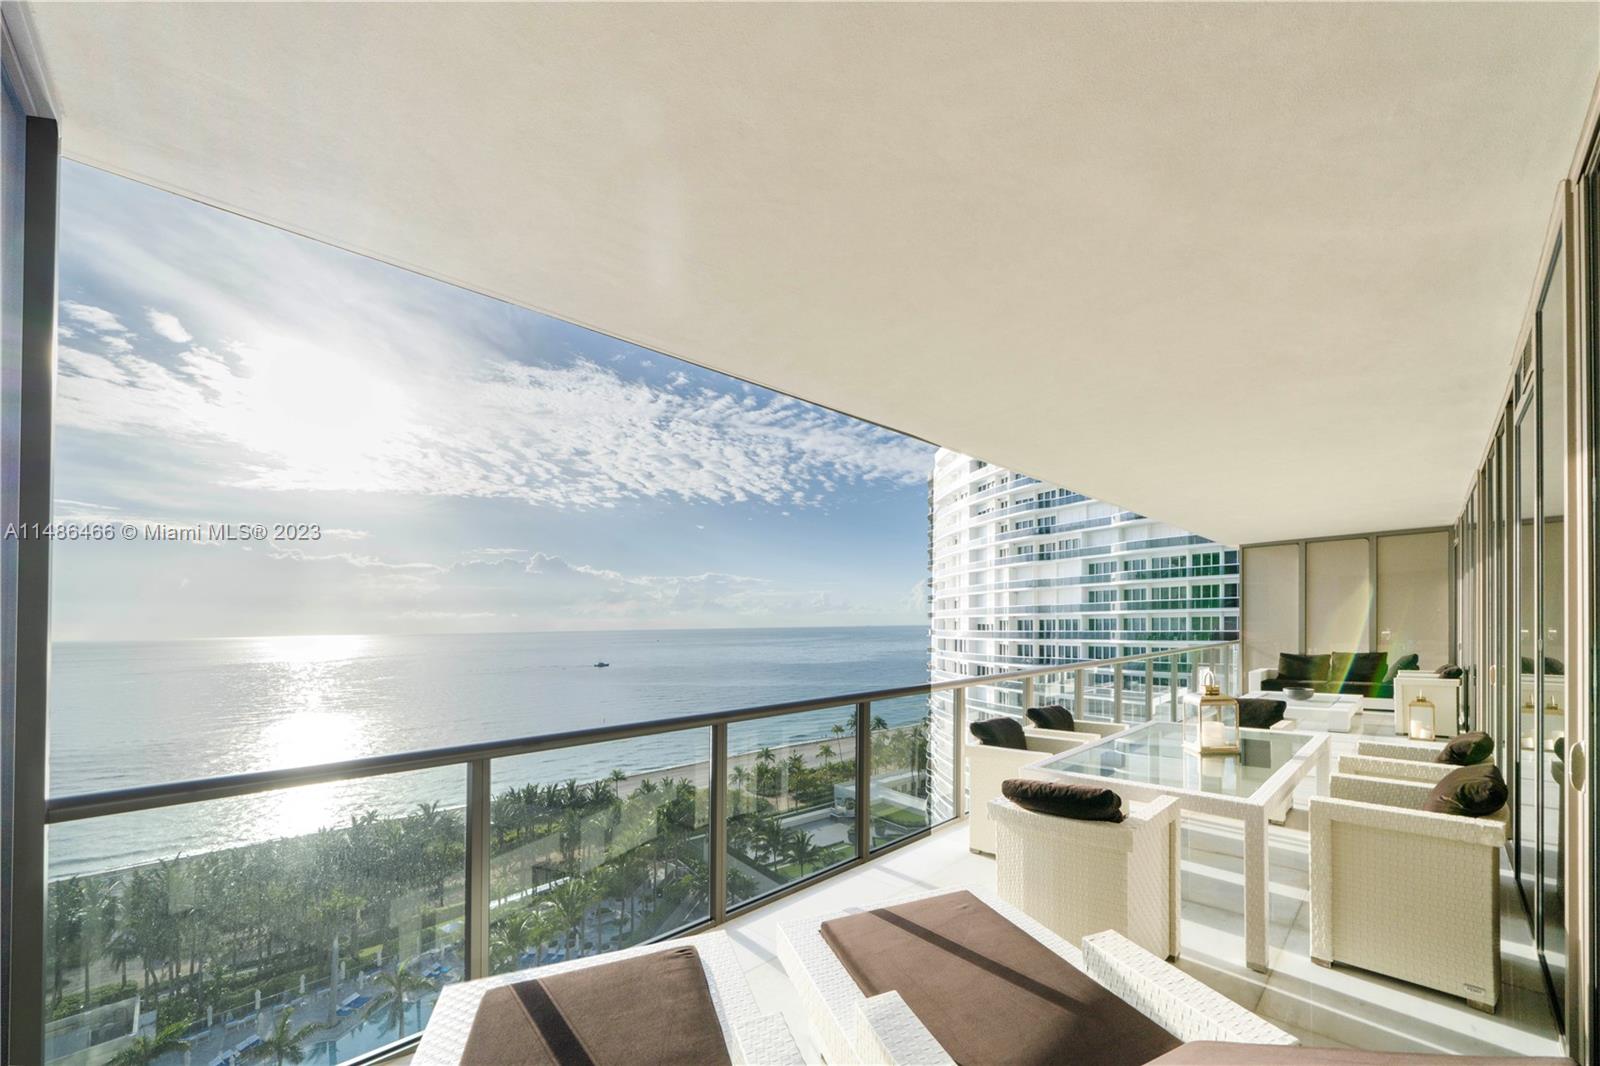 Experience the epitome of luxury oceanfront living at the St. Regis Bal Harbour. Stunning 3BD/4BA flow-through residence with breathtaking ocean sunrise views & serene downtown sunset views from the 2 wide oversized terraces. Offering private elevator foyer entry, elegant living spaces, impact windows & doors, a huge eat-in gas kitchen w/ island & Top-of-the-Line Miele & SubZero appliances, impressive bar, & spacious bedrms all w/ensuite baths. The primary suite is complete w/ unobstructed ocean views, walk-in closet w/ vanity & bathrm w/ heated towel rack, jacuzzi tub, & European shower. Live directly across from Bal Harbour Shops at this coveted building. Residents enjoy a Shabbat elevator, State-of-the-Art amenities including 2 pools, White-Glove service & easy living on the sand!